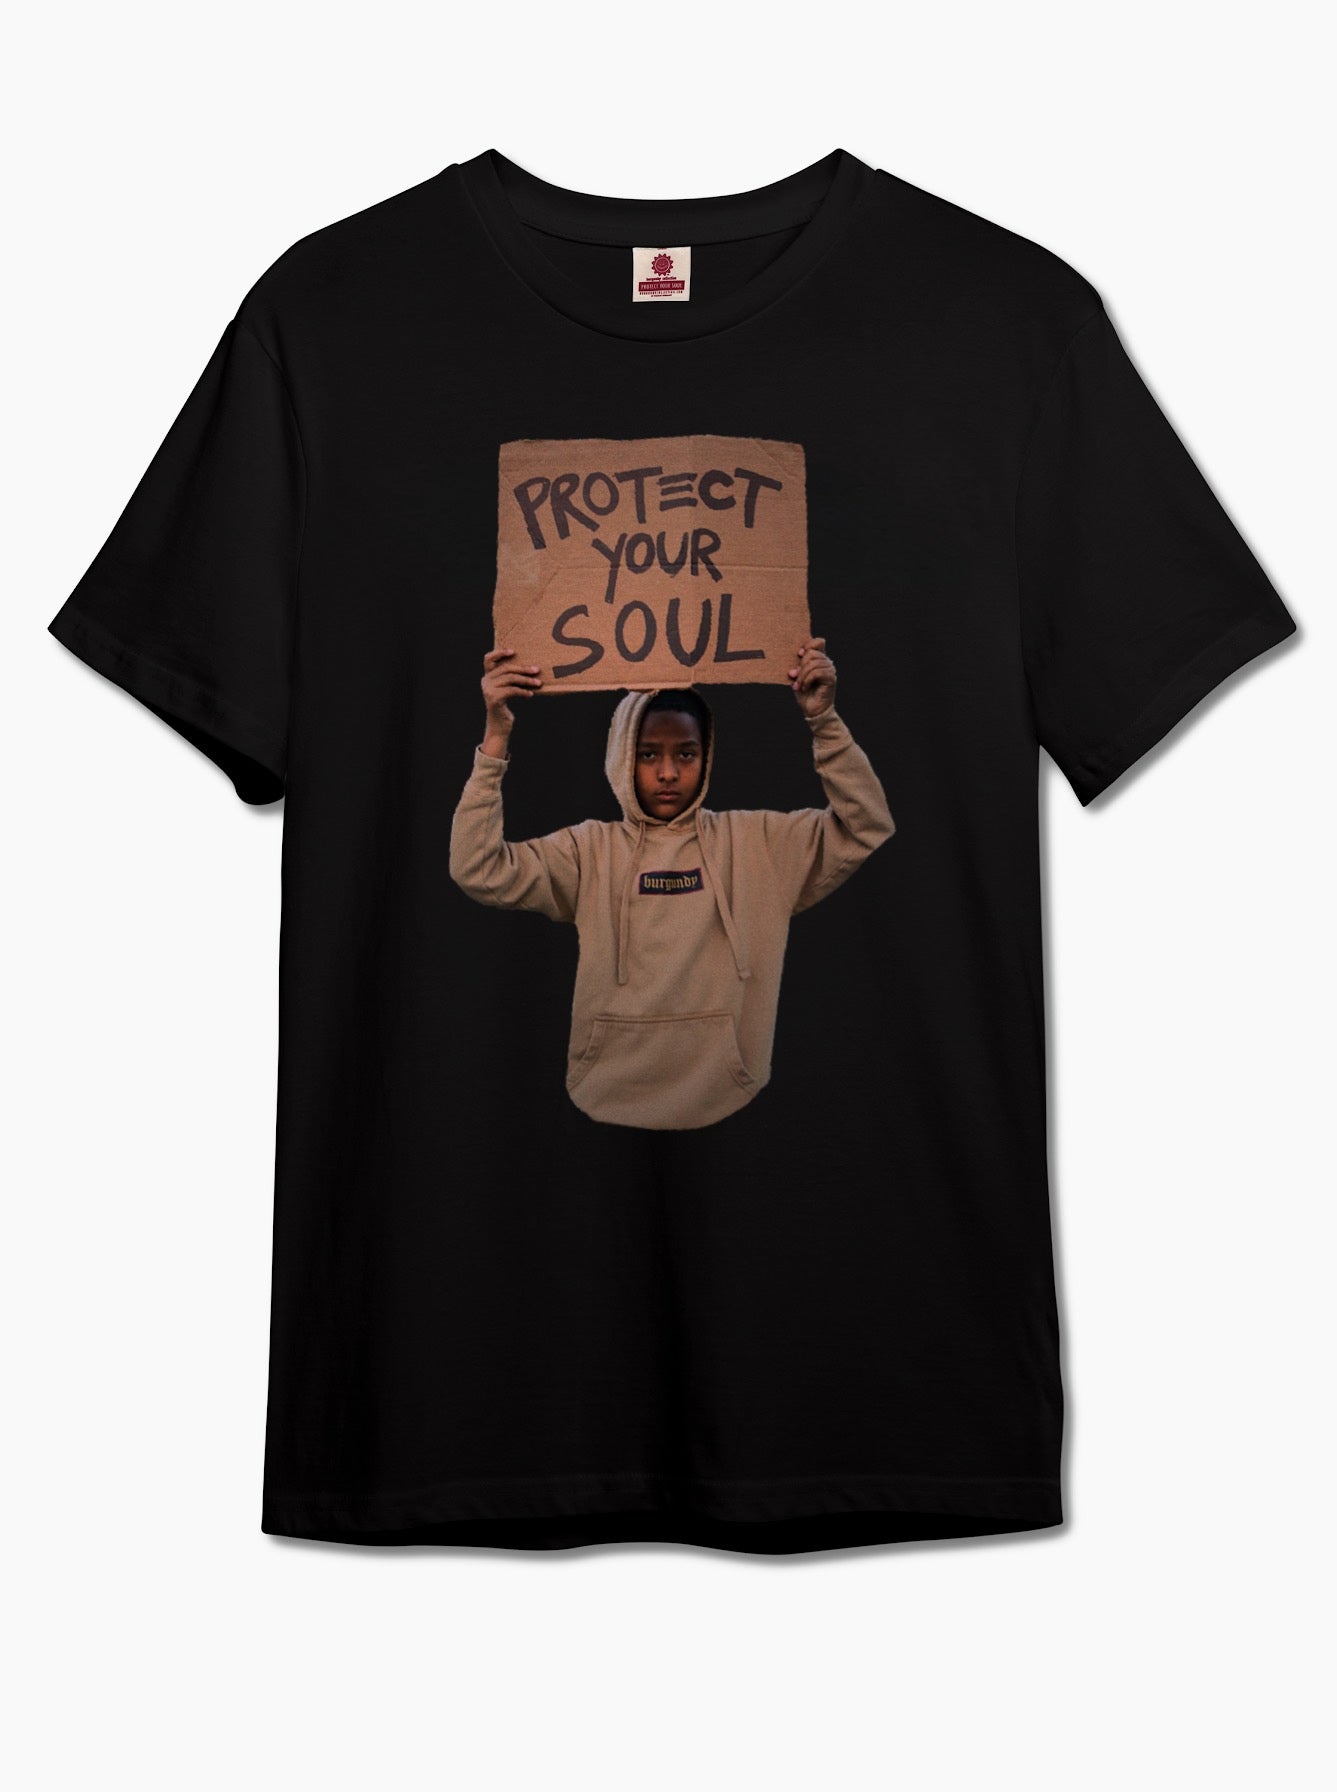 PROTECT YOUR SOUL (T-SHIRT)